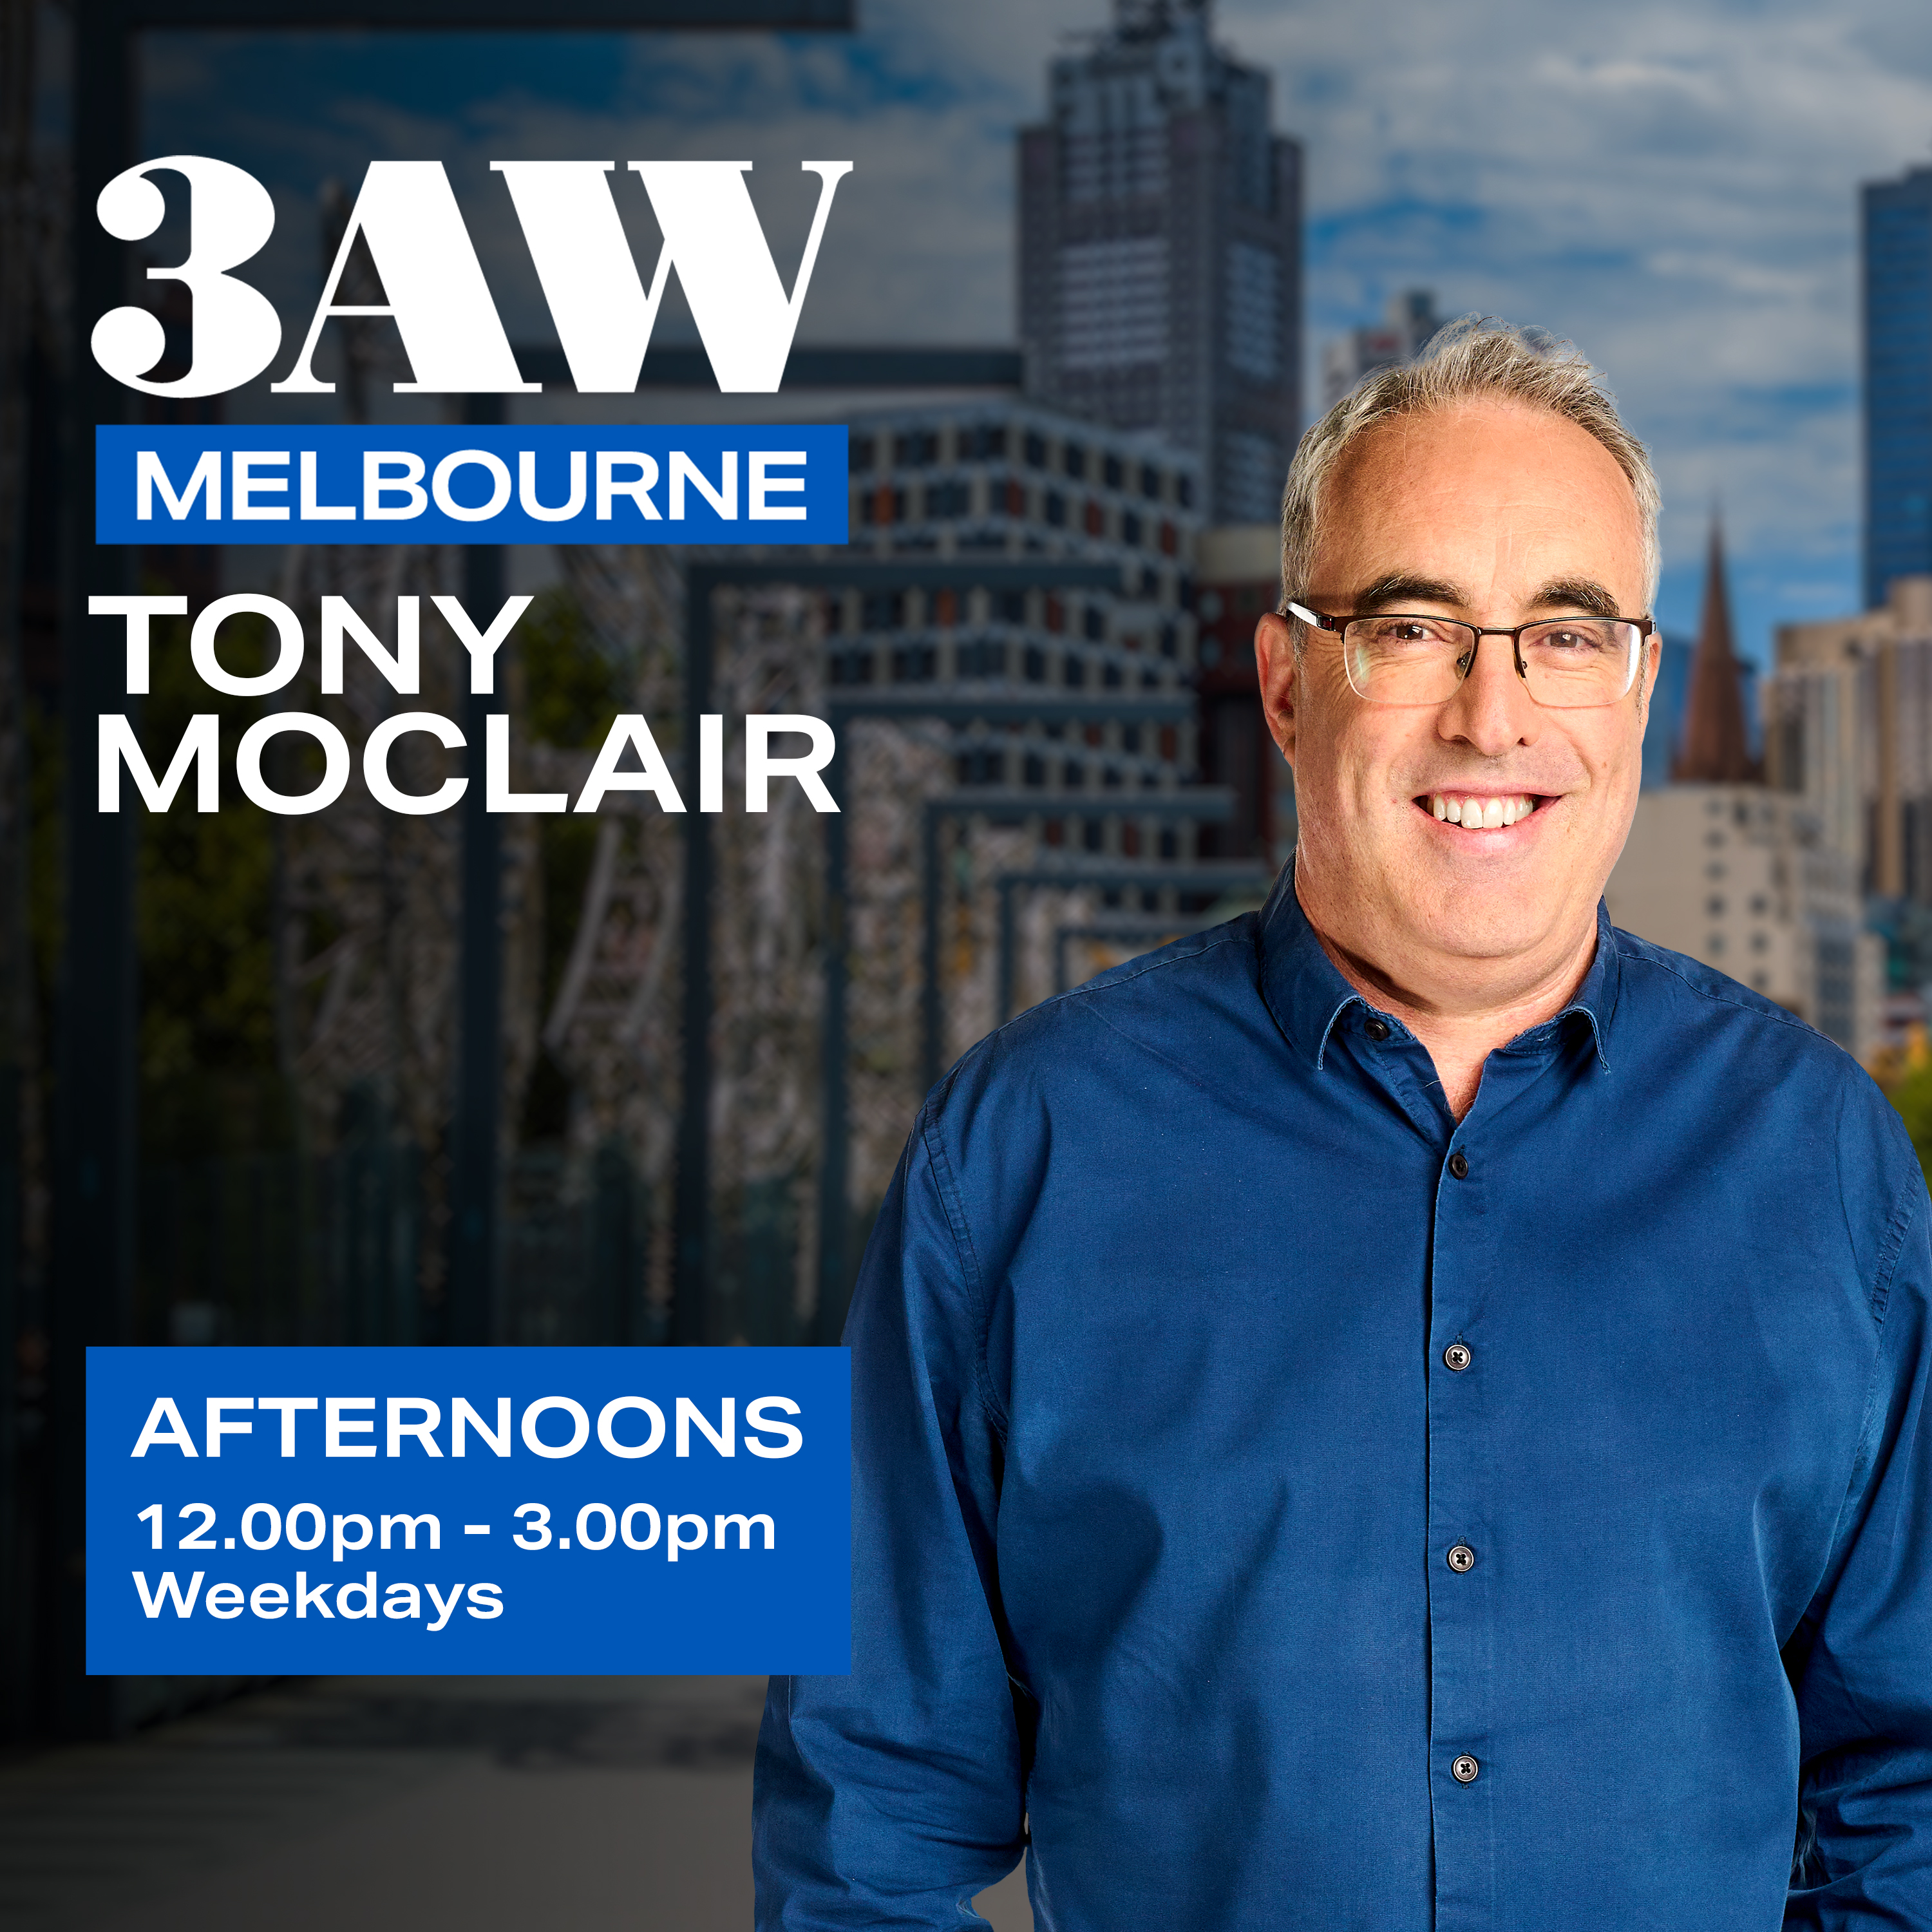 Chris Isaak joins Tony Moclair on 3AW Afternoons!